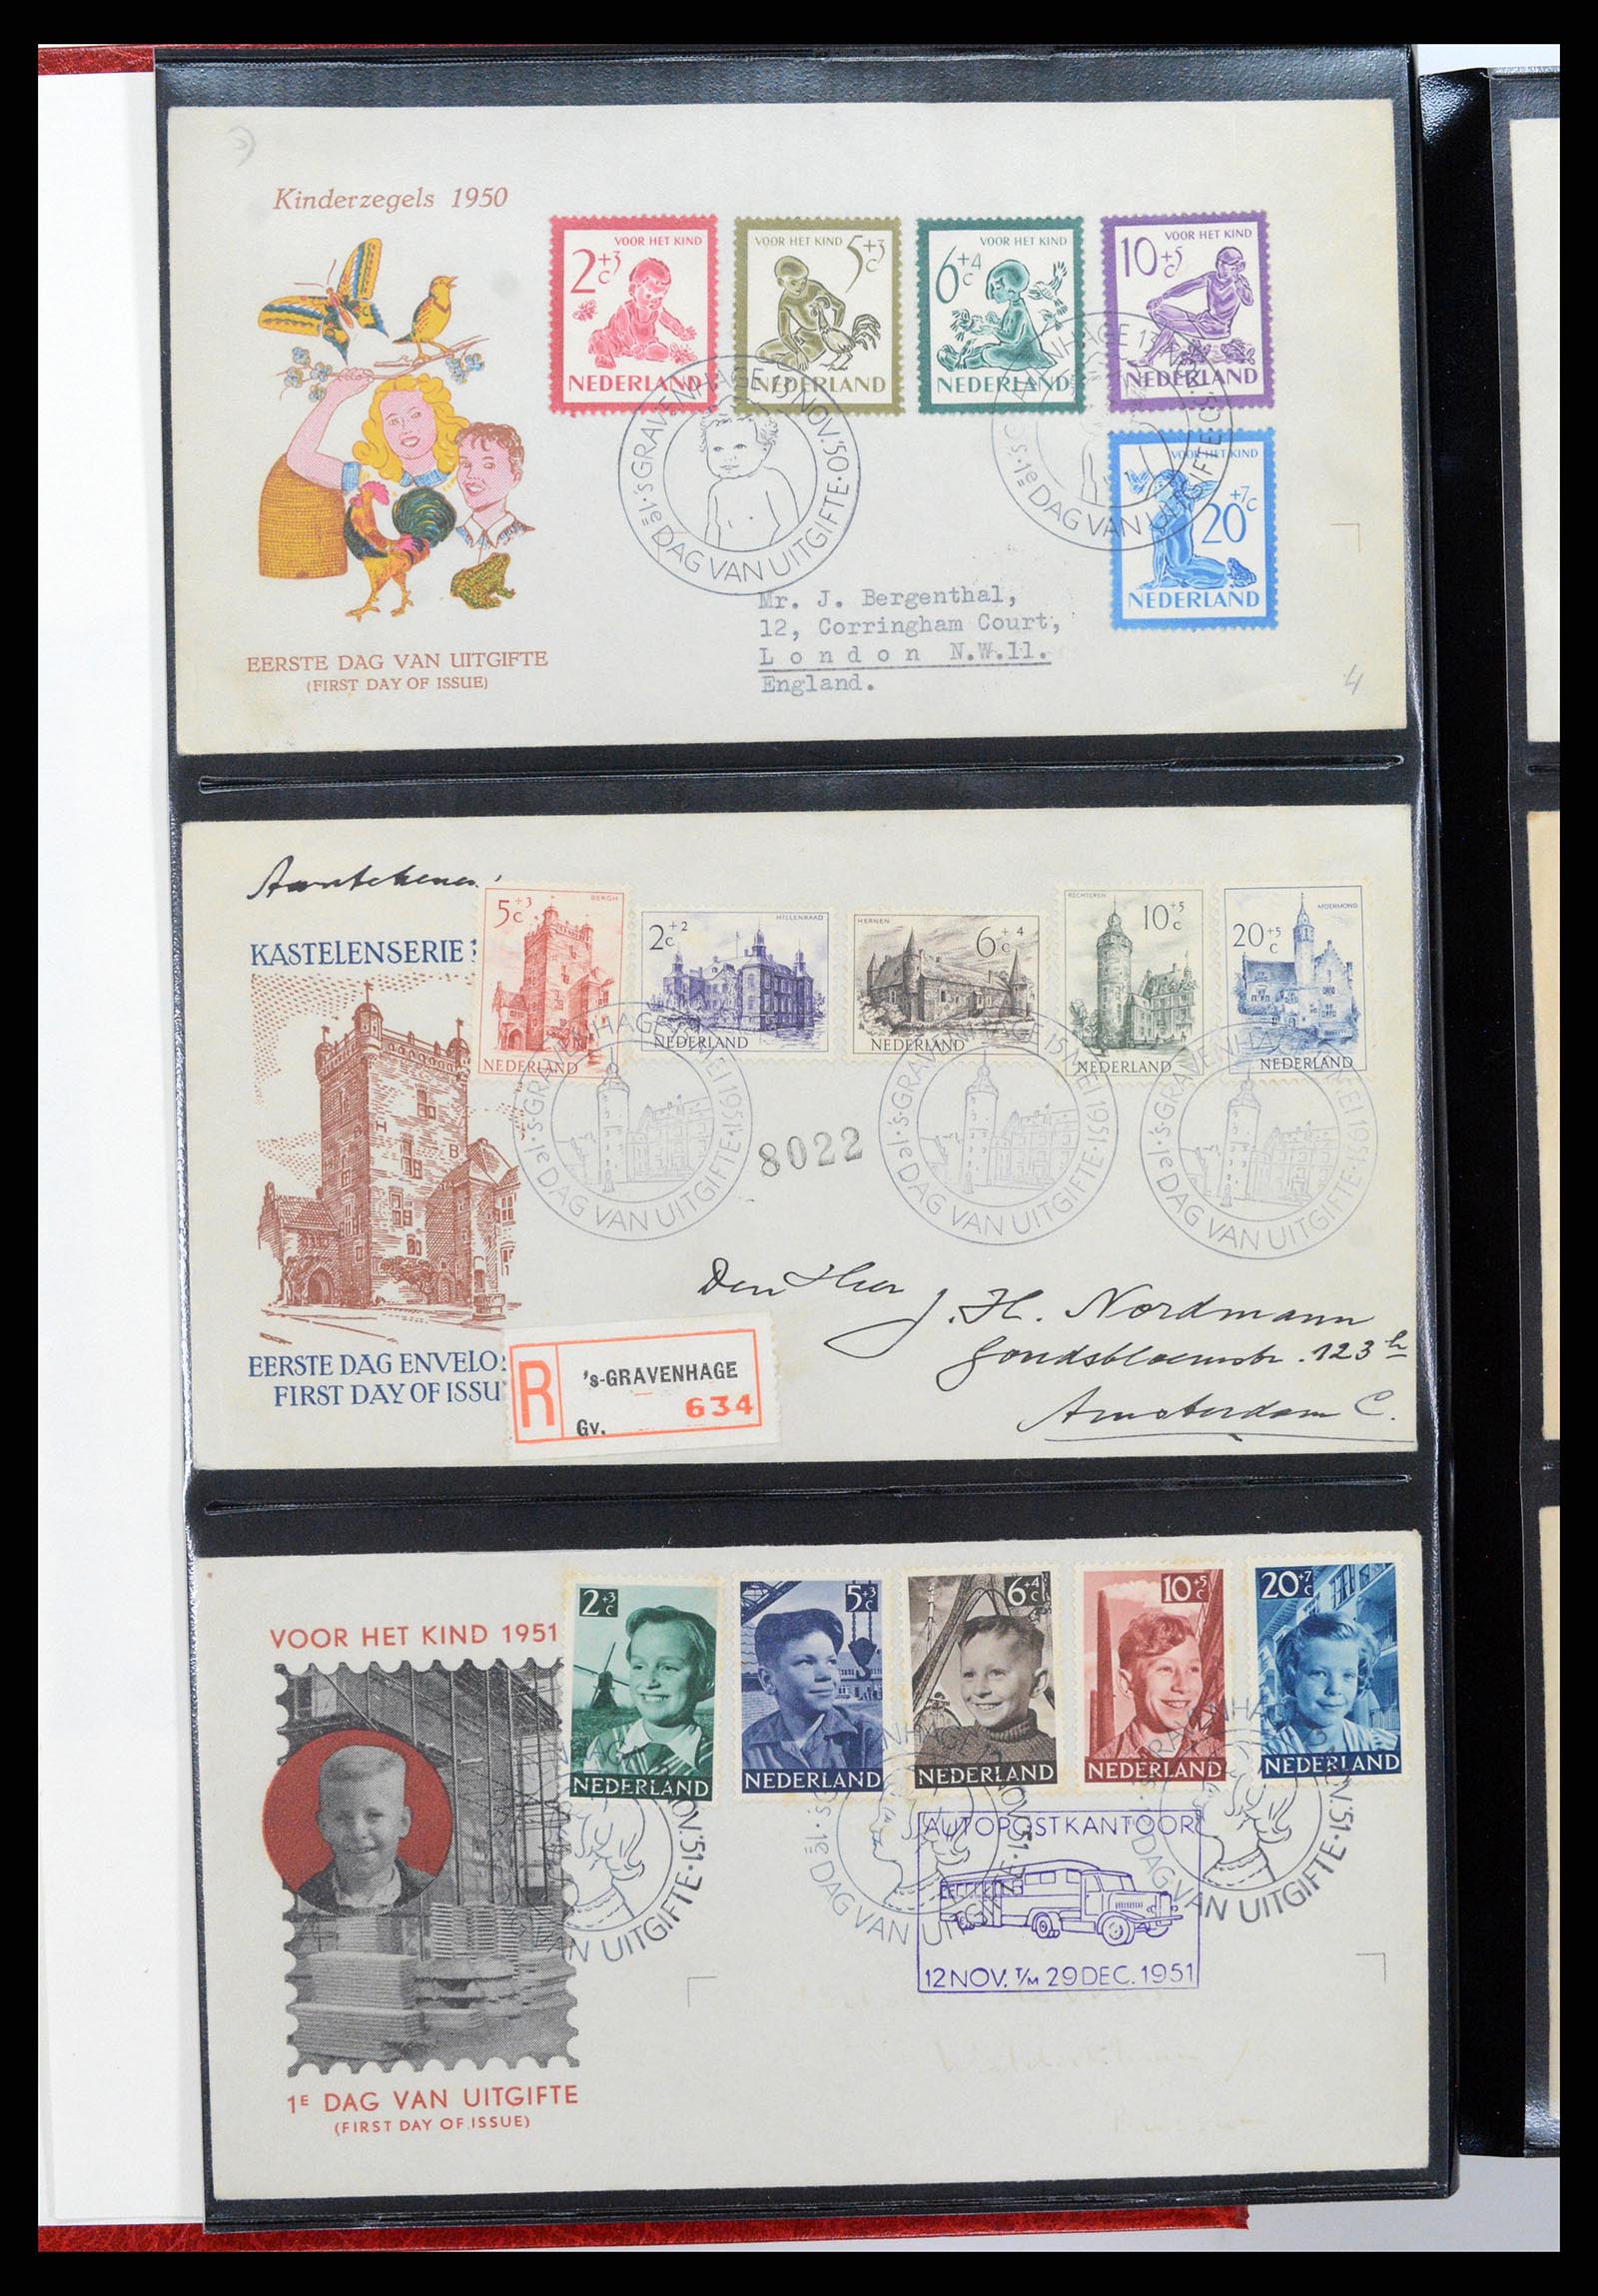 37484 003 - Stamp collection 37484 Netherlands FDC's 1950-1976.